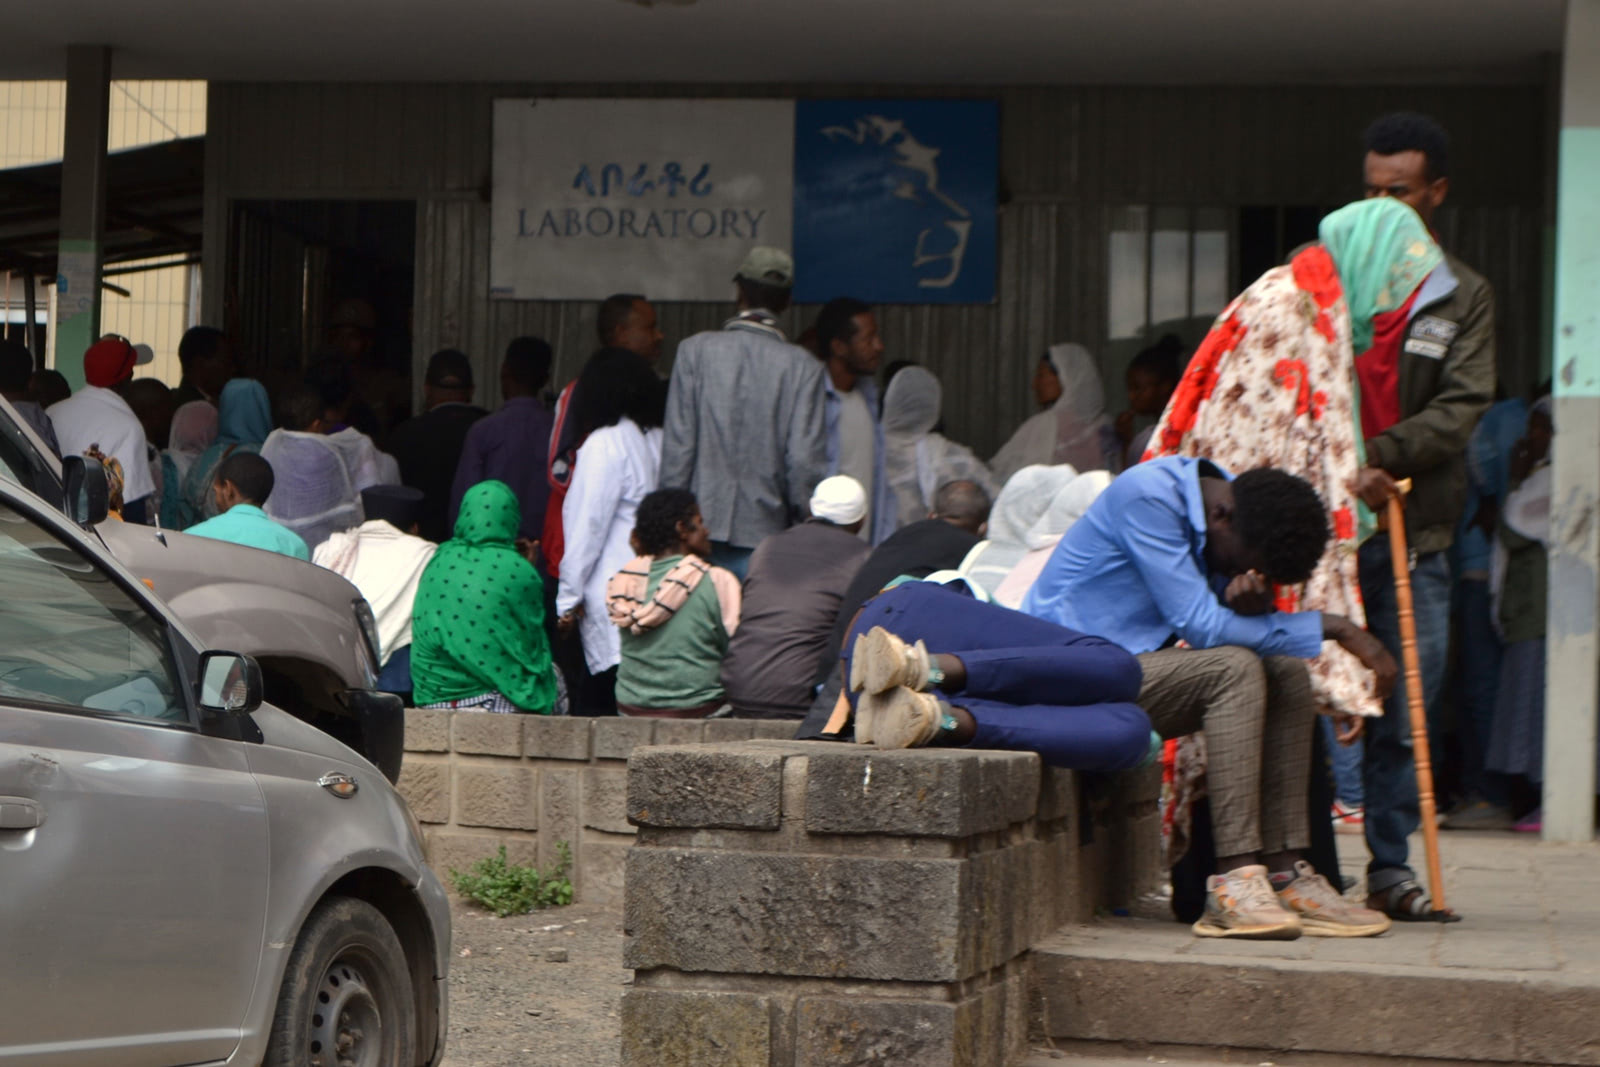 Ethiopia people waiting outside of a laboratory